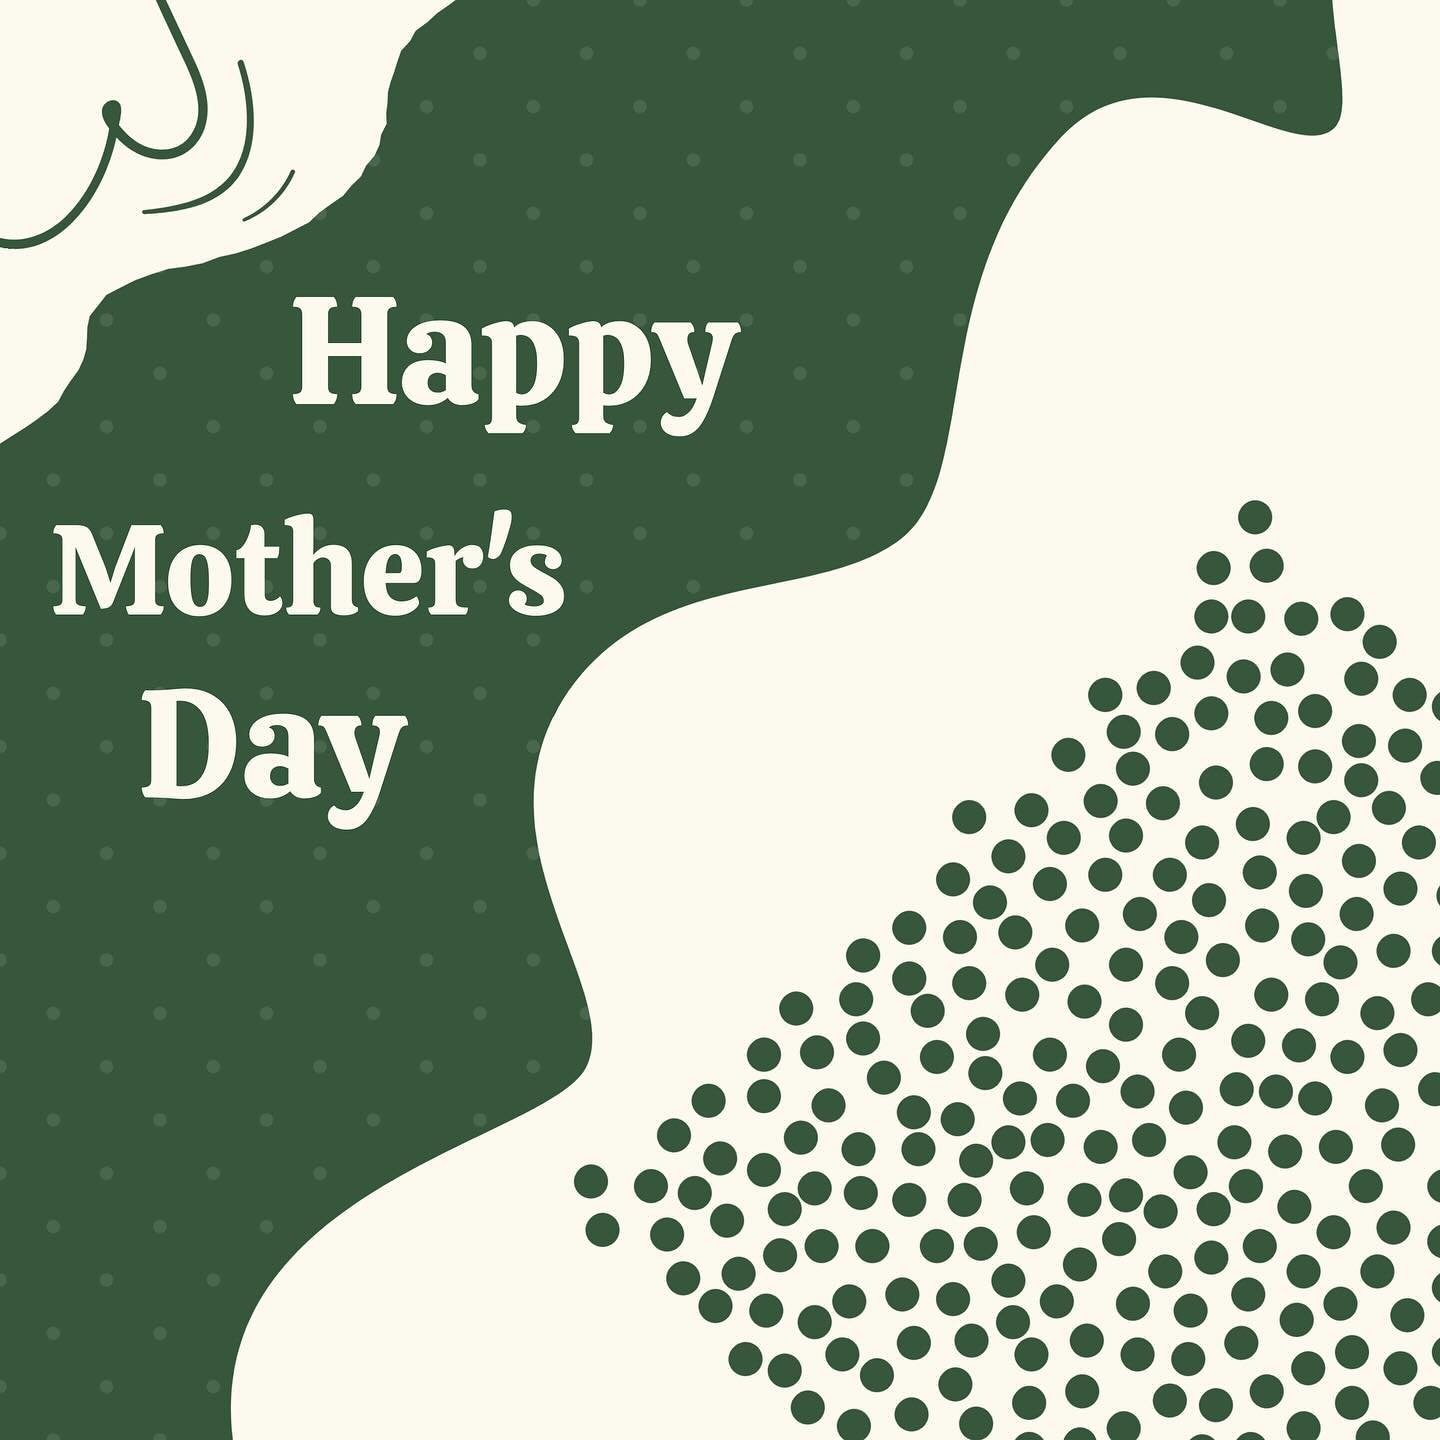 Happy mother&rsquo;s day!! 
&ldquo;Mothers plant the seeds of love that blooms forever &ldquo; 🪴💚

If she loves her garden and plants, well&hellip; Biofeed is the perfect organic plant food to gift her 🎁 
Find us at #thewarehousenz The Warehouse

